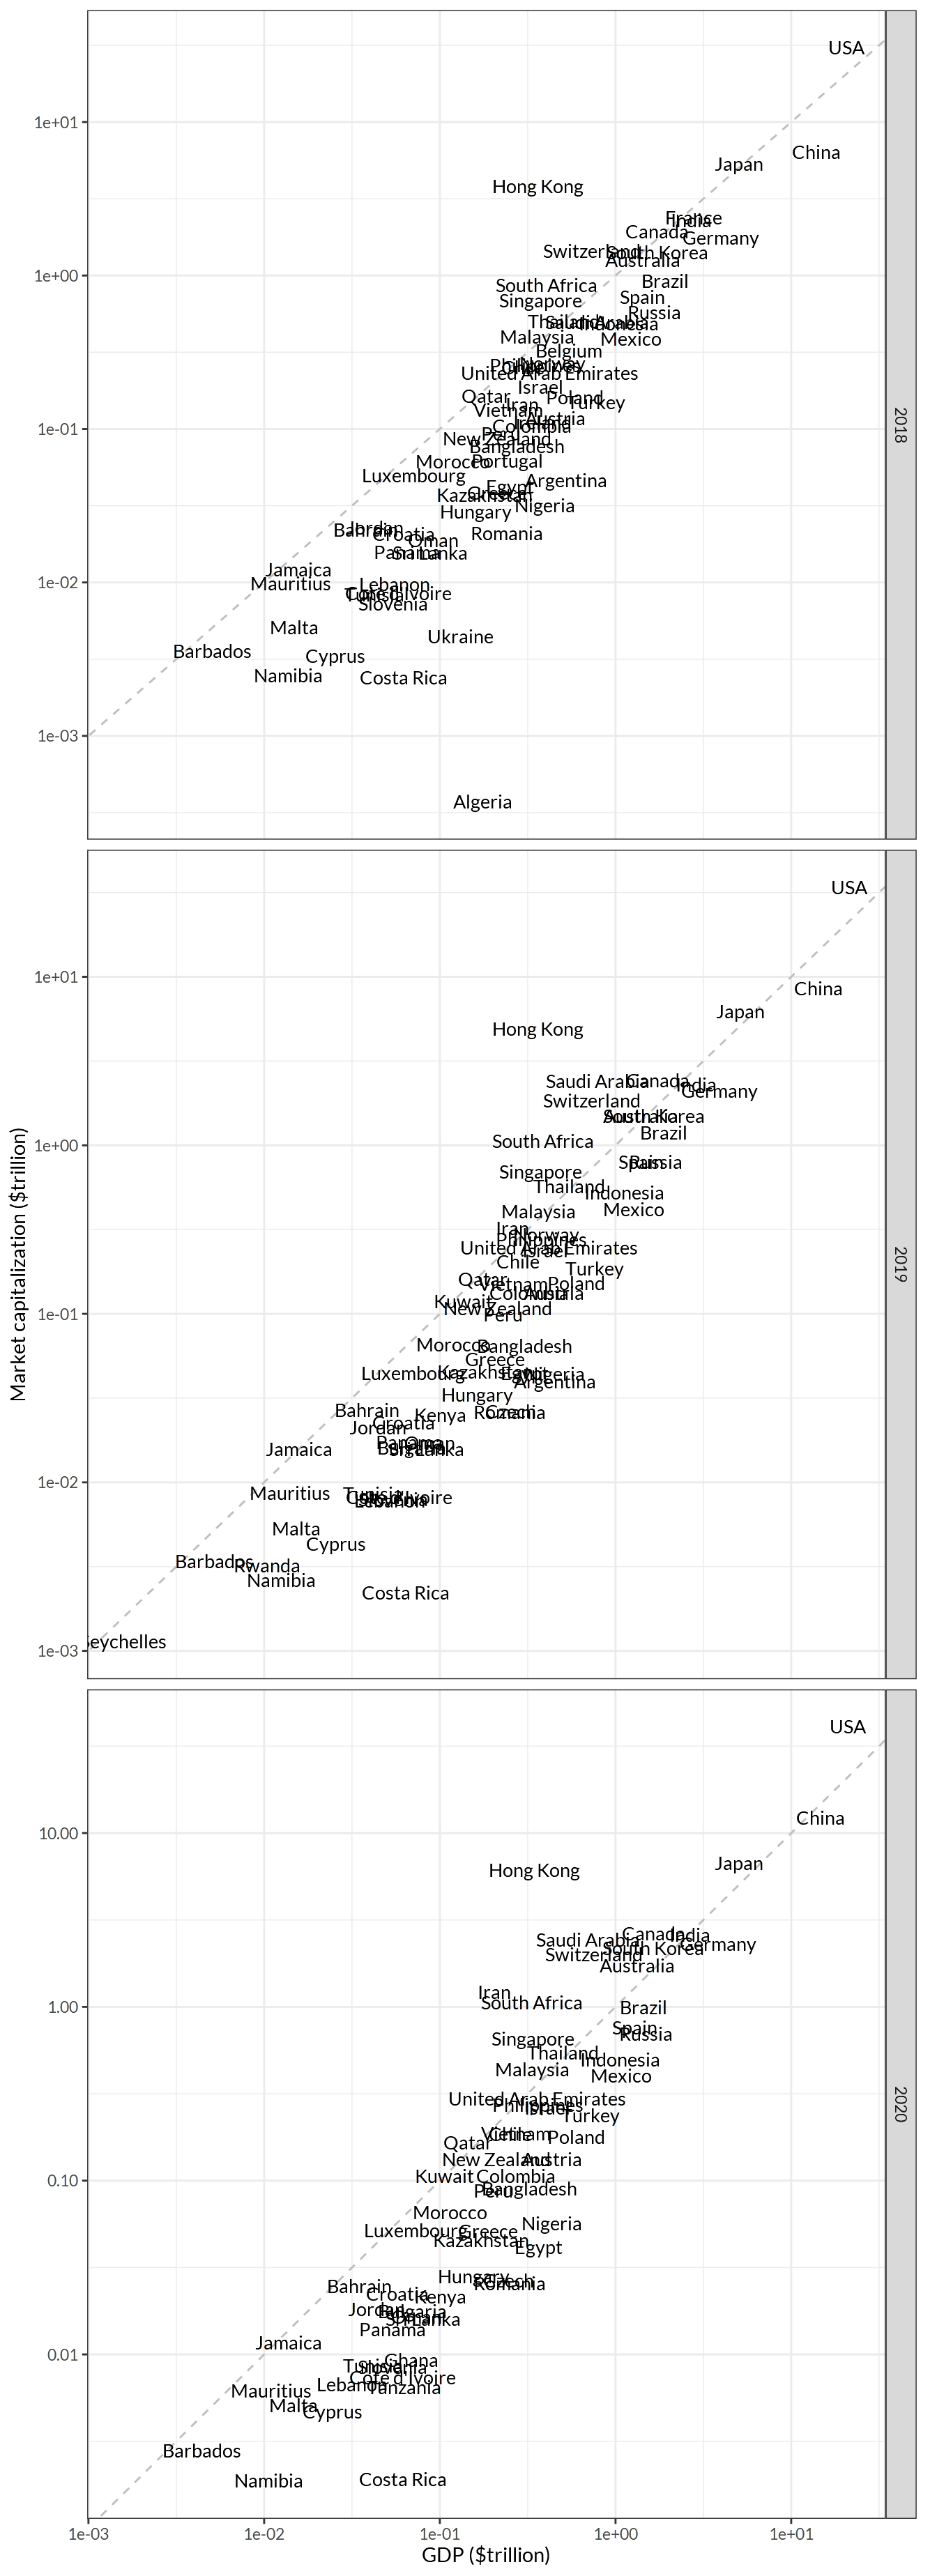 Same data as in Figure 11.2